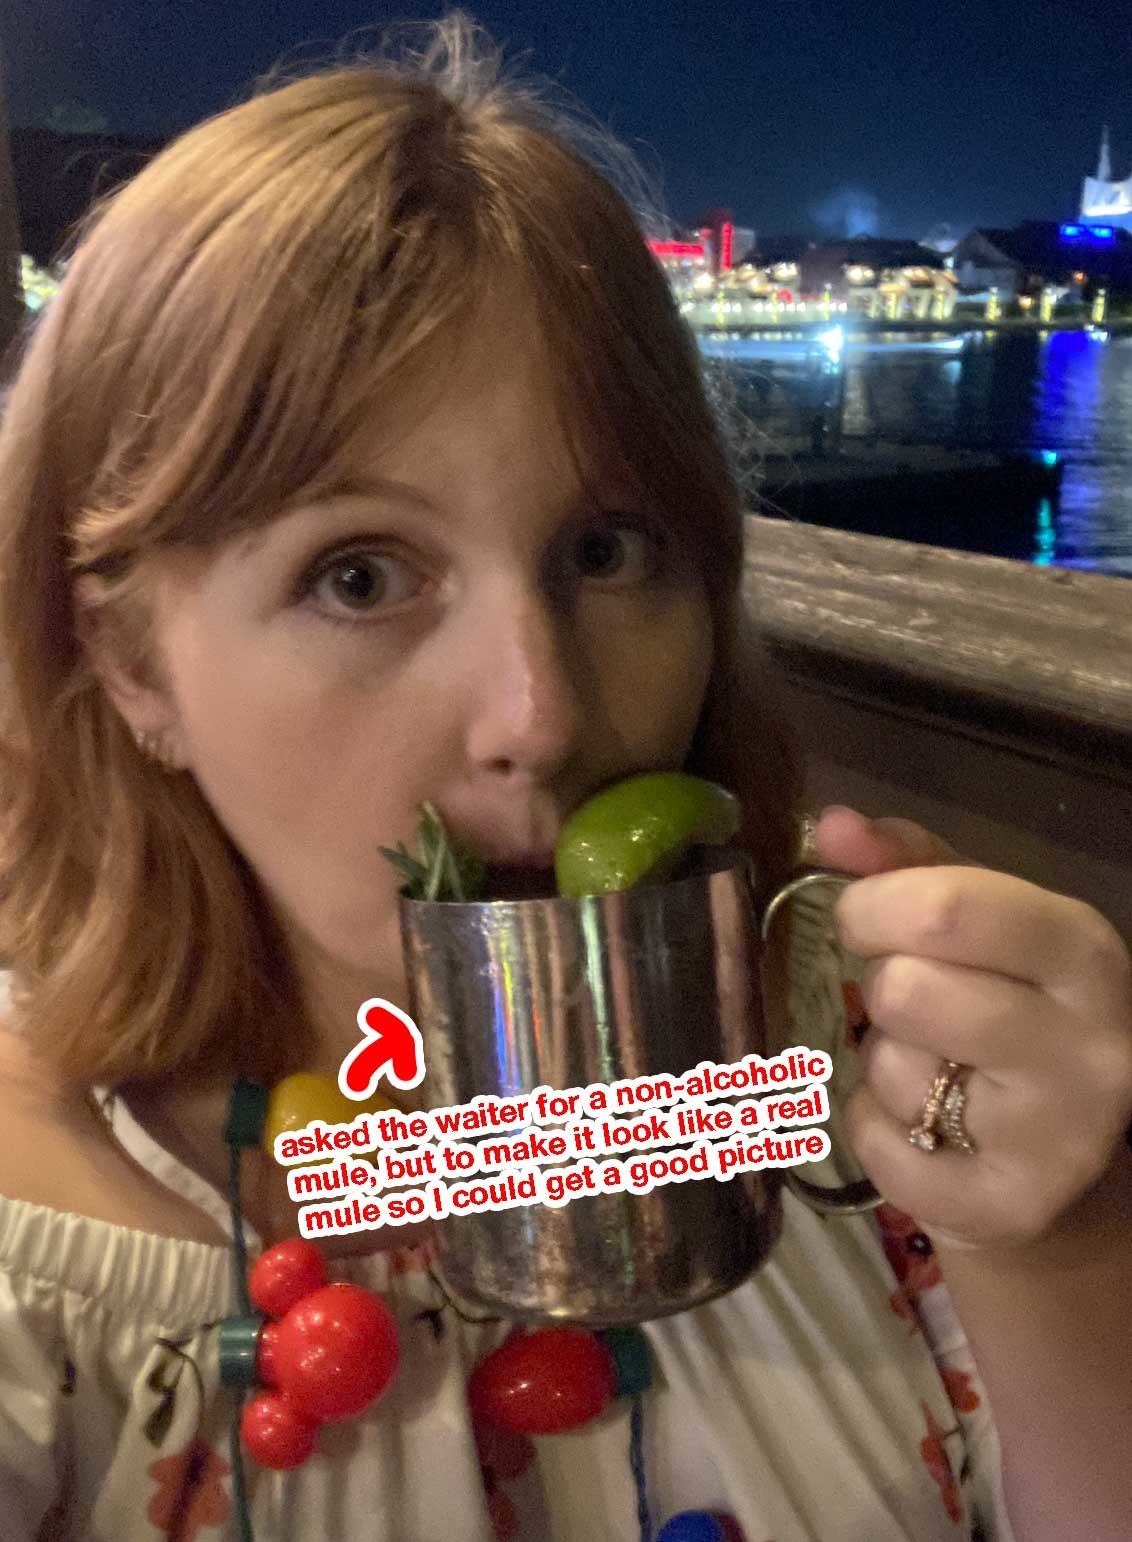 the author with a beverage and the words &quot;asked the waiter for a non-alcoholic mule, but to make it look like a real mule so I could get a good picture&quot;